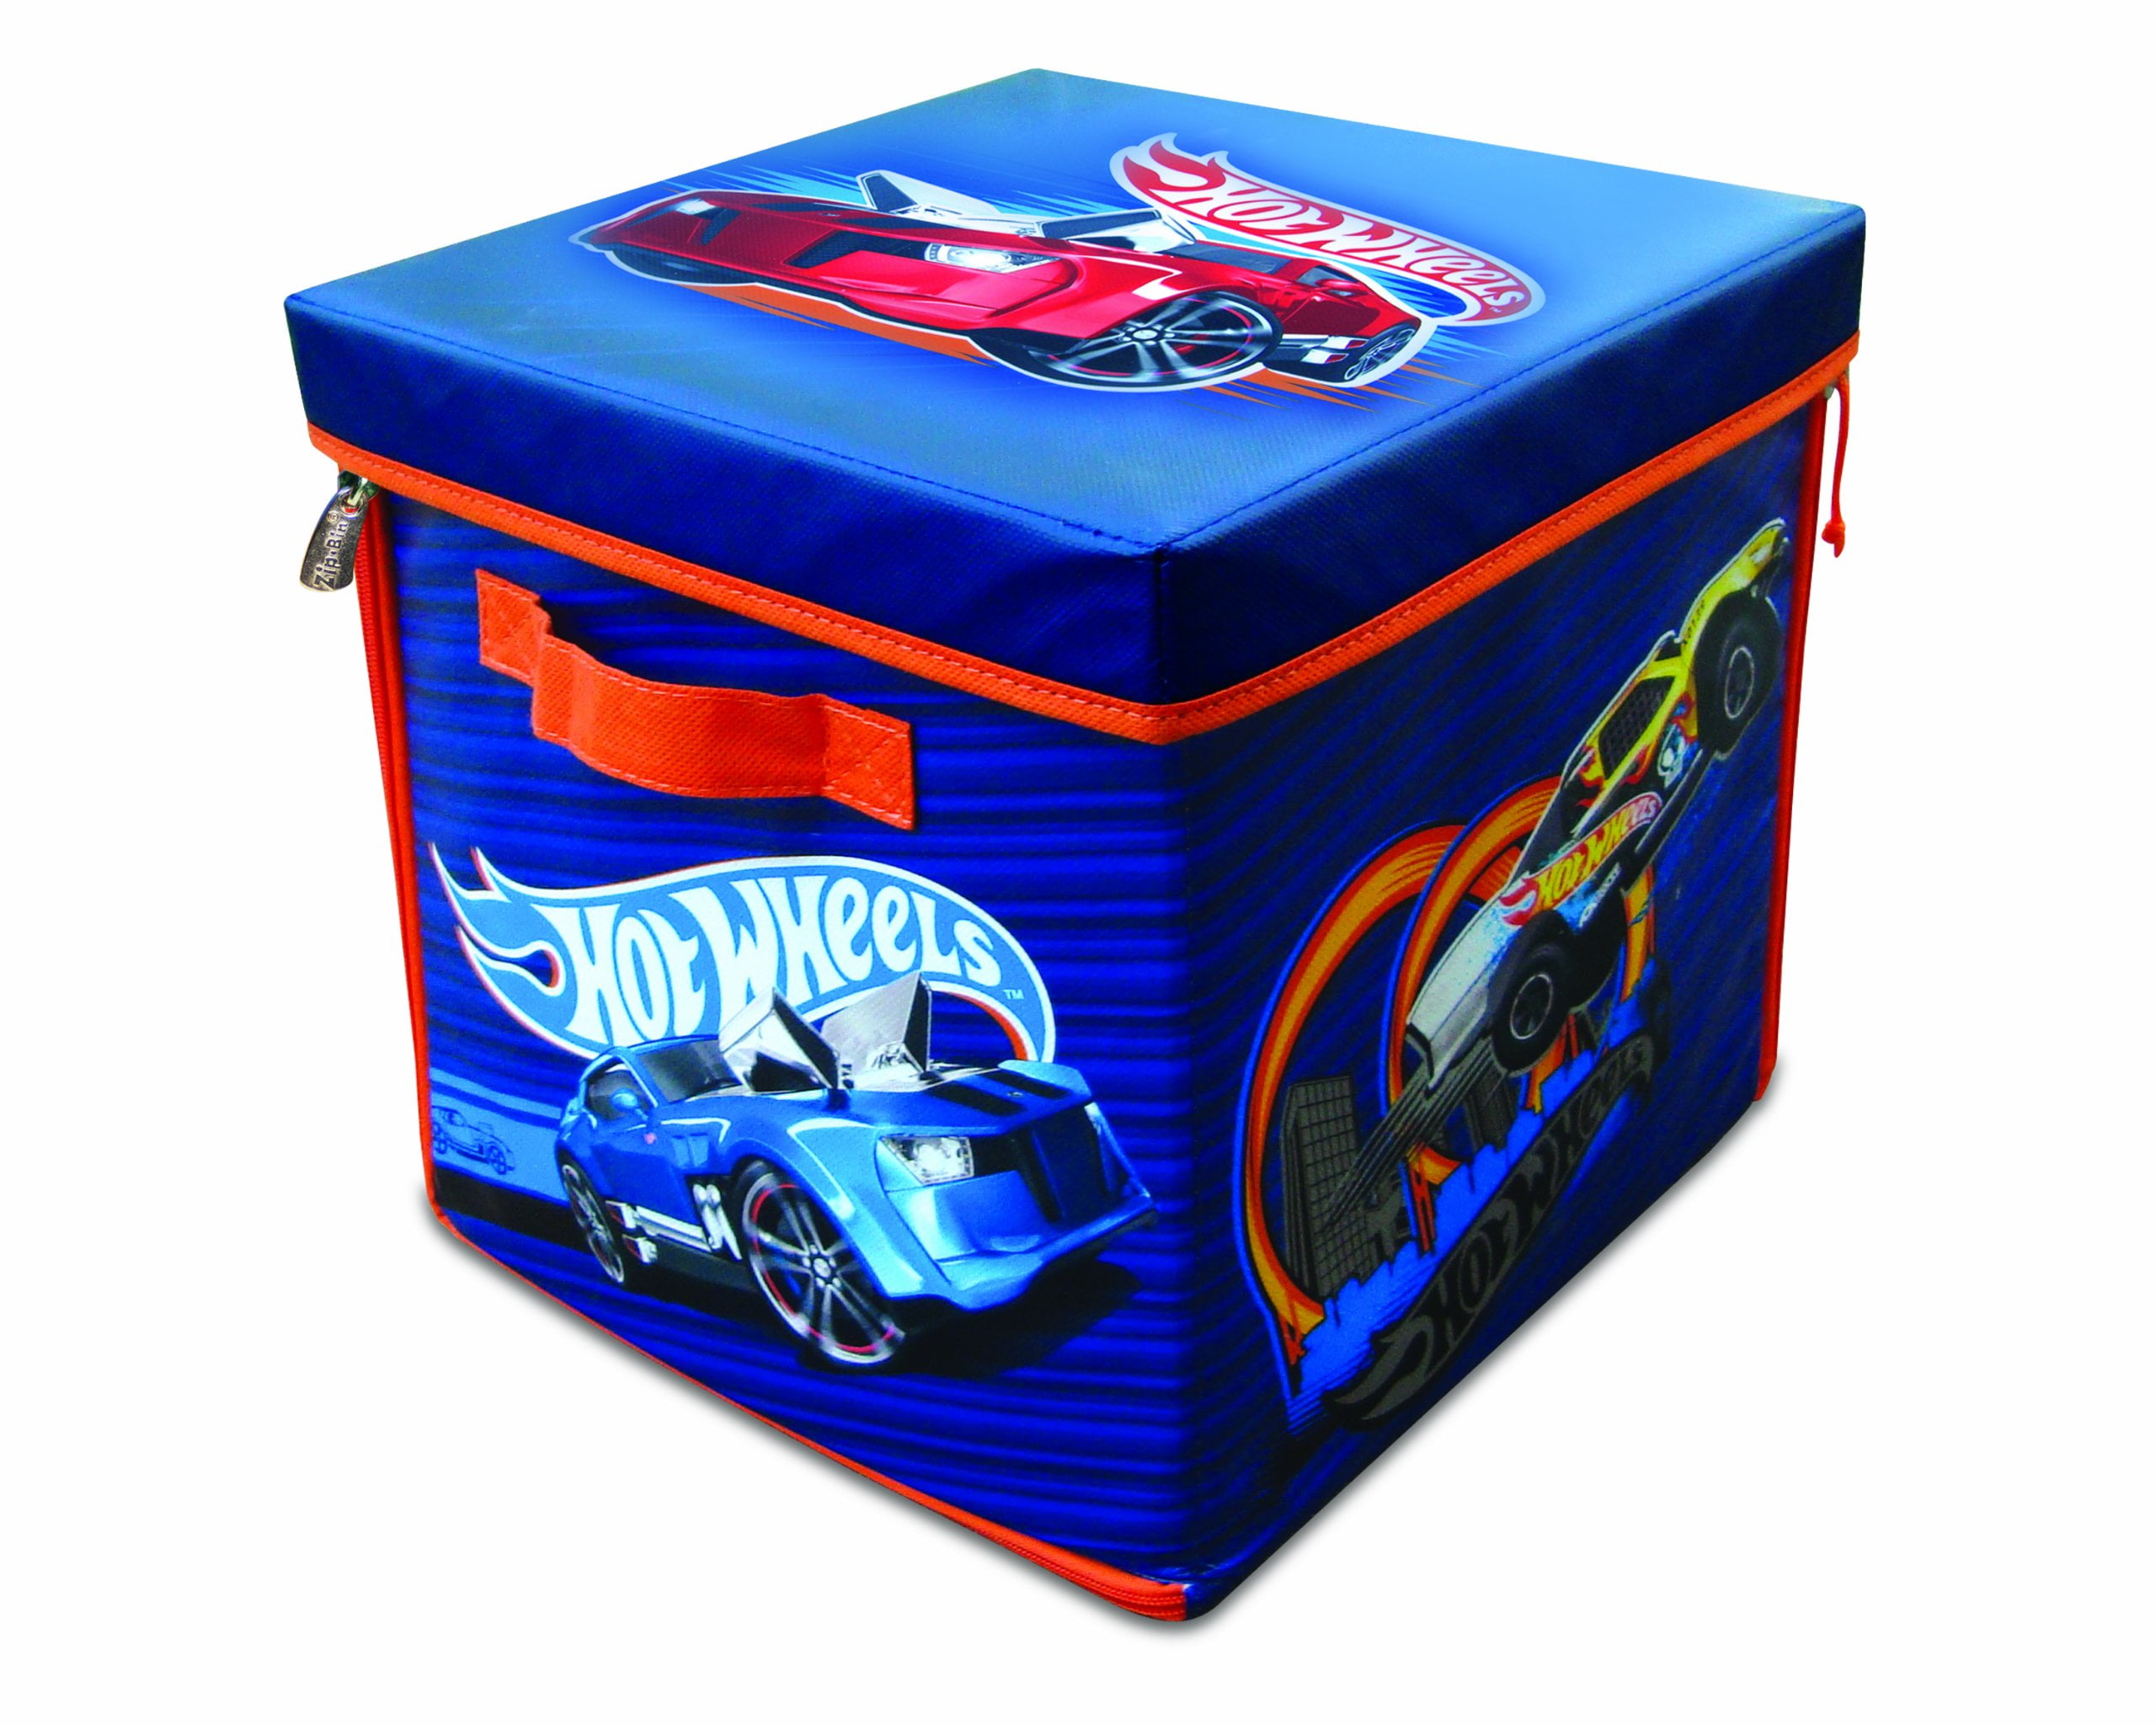 Hot Wheels Carry Case Easy Toy Carry Box Kids Handle Gift New UK 